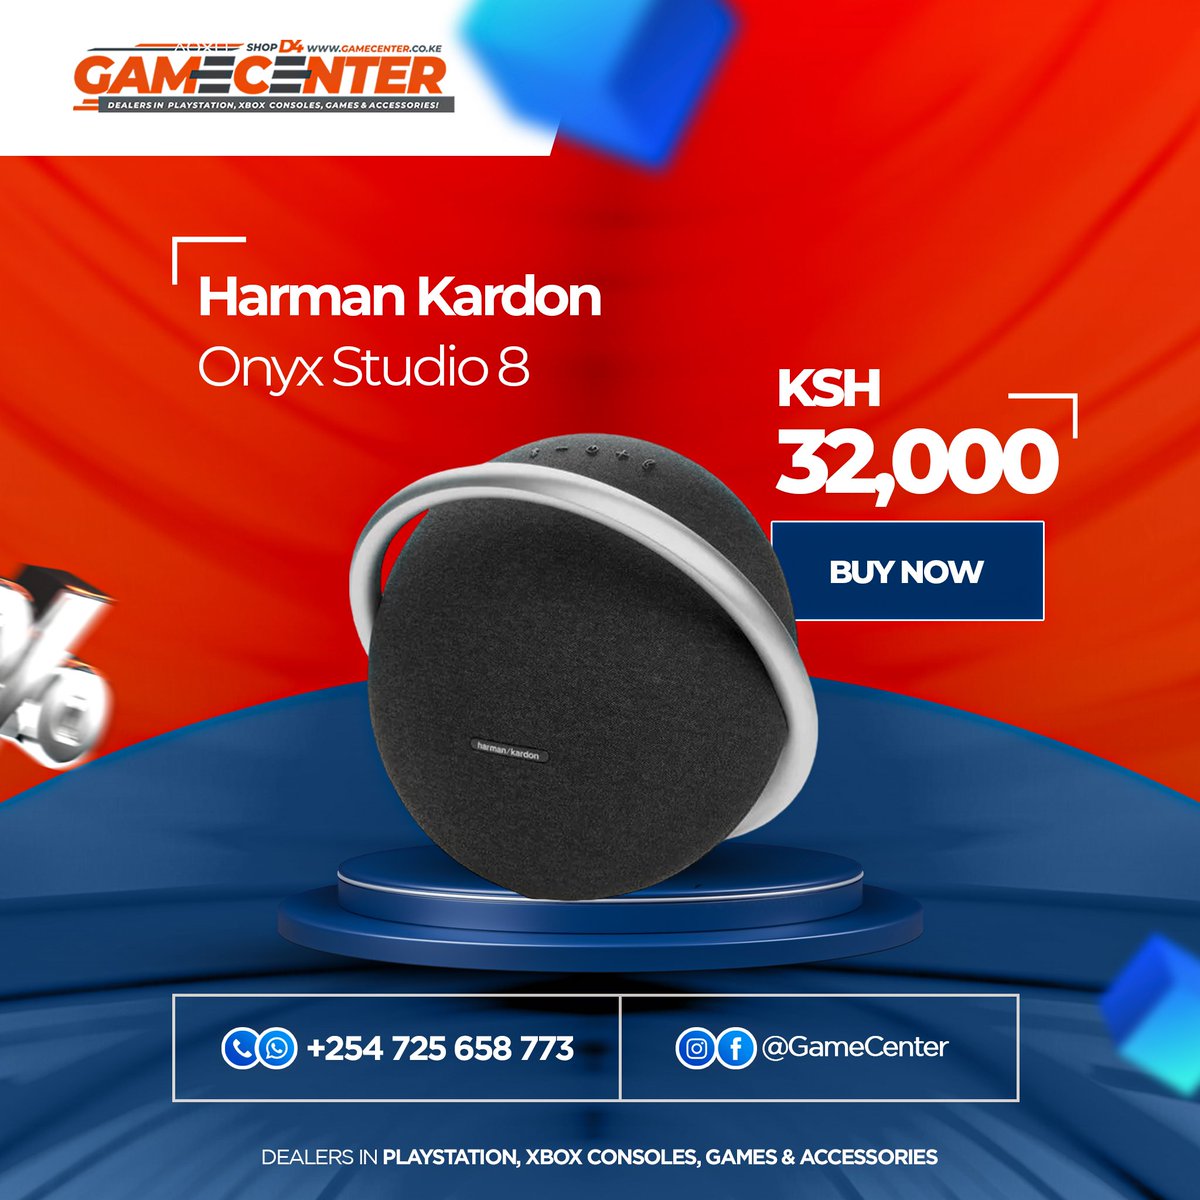 Create your own vibe with the Harman Kardon Onyx Studio 8. Both stylish and sustainable, it's crafted from recycled materials, combining eco-friendly choices and beautiful design. Use the sleek, anodized aluminum handle to carry the portable speaker anywhere.